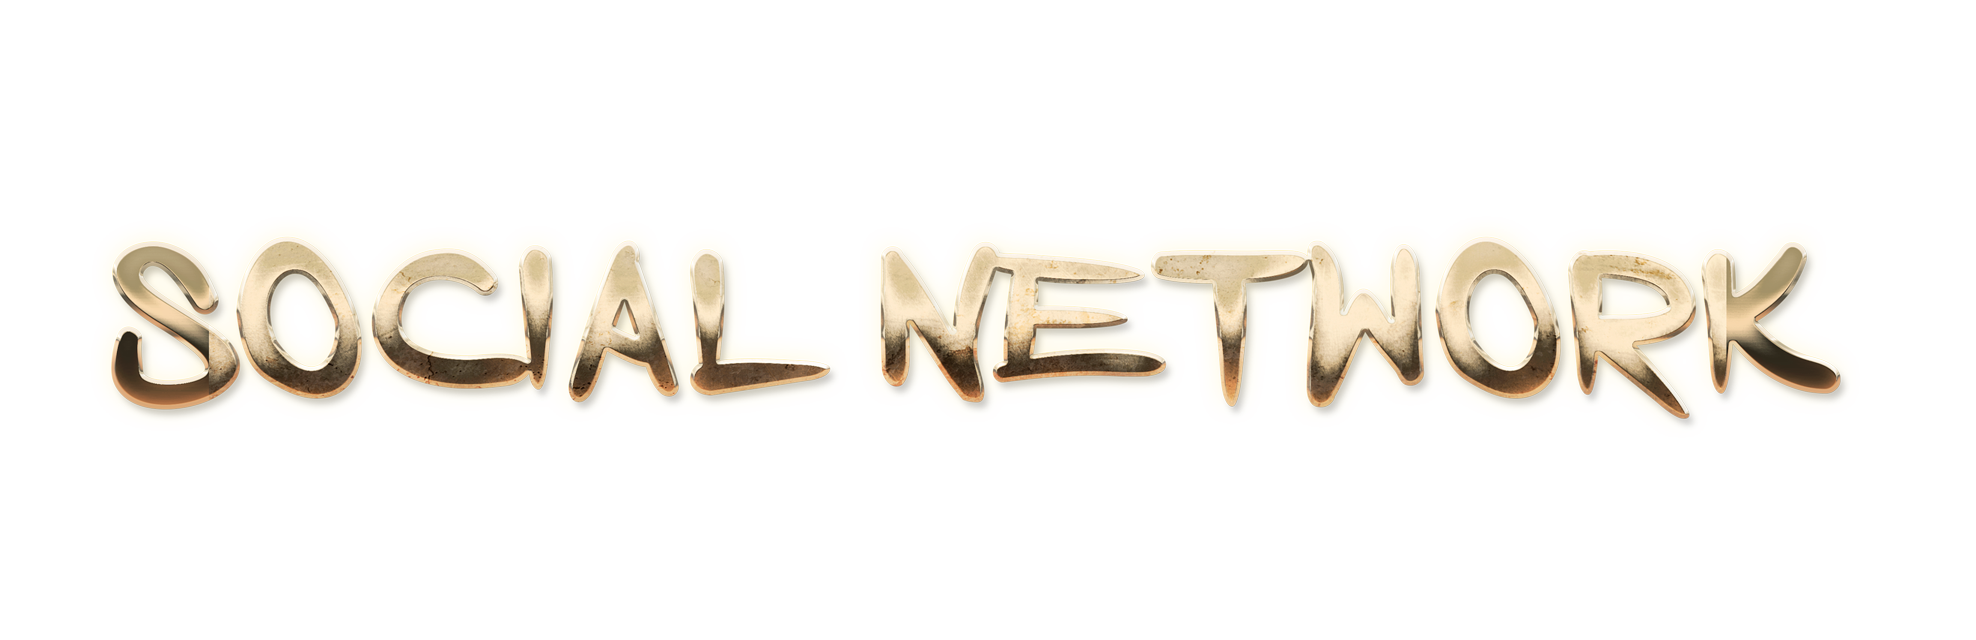 WORD SOCIAL NETWORK gold text effects art typography PNG images free